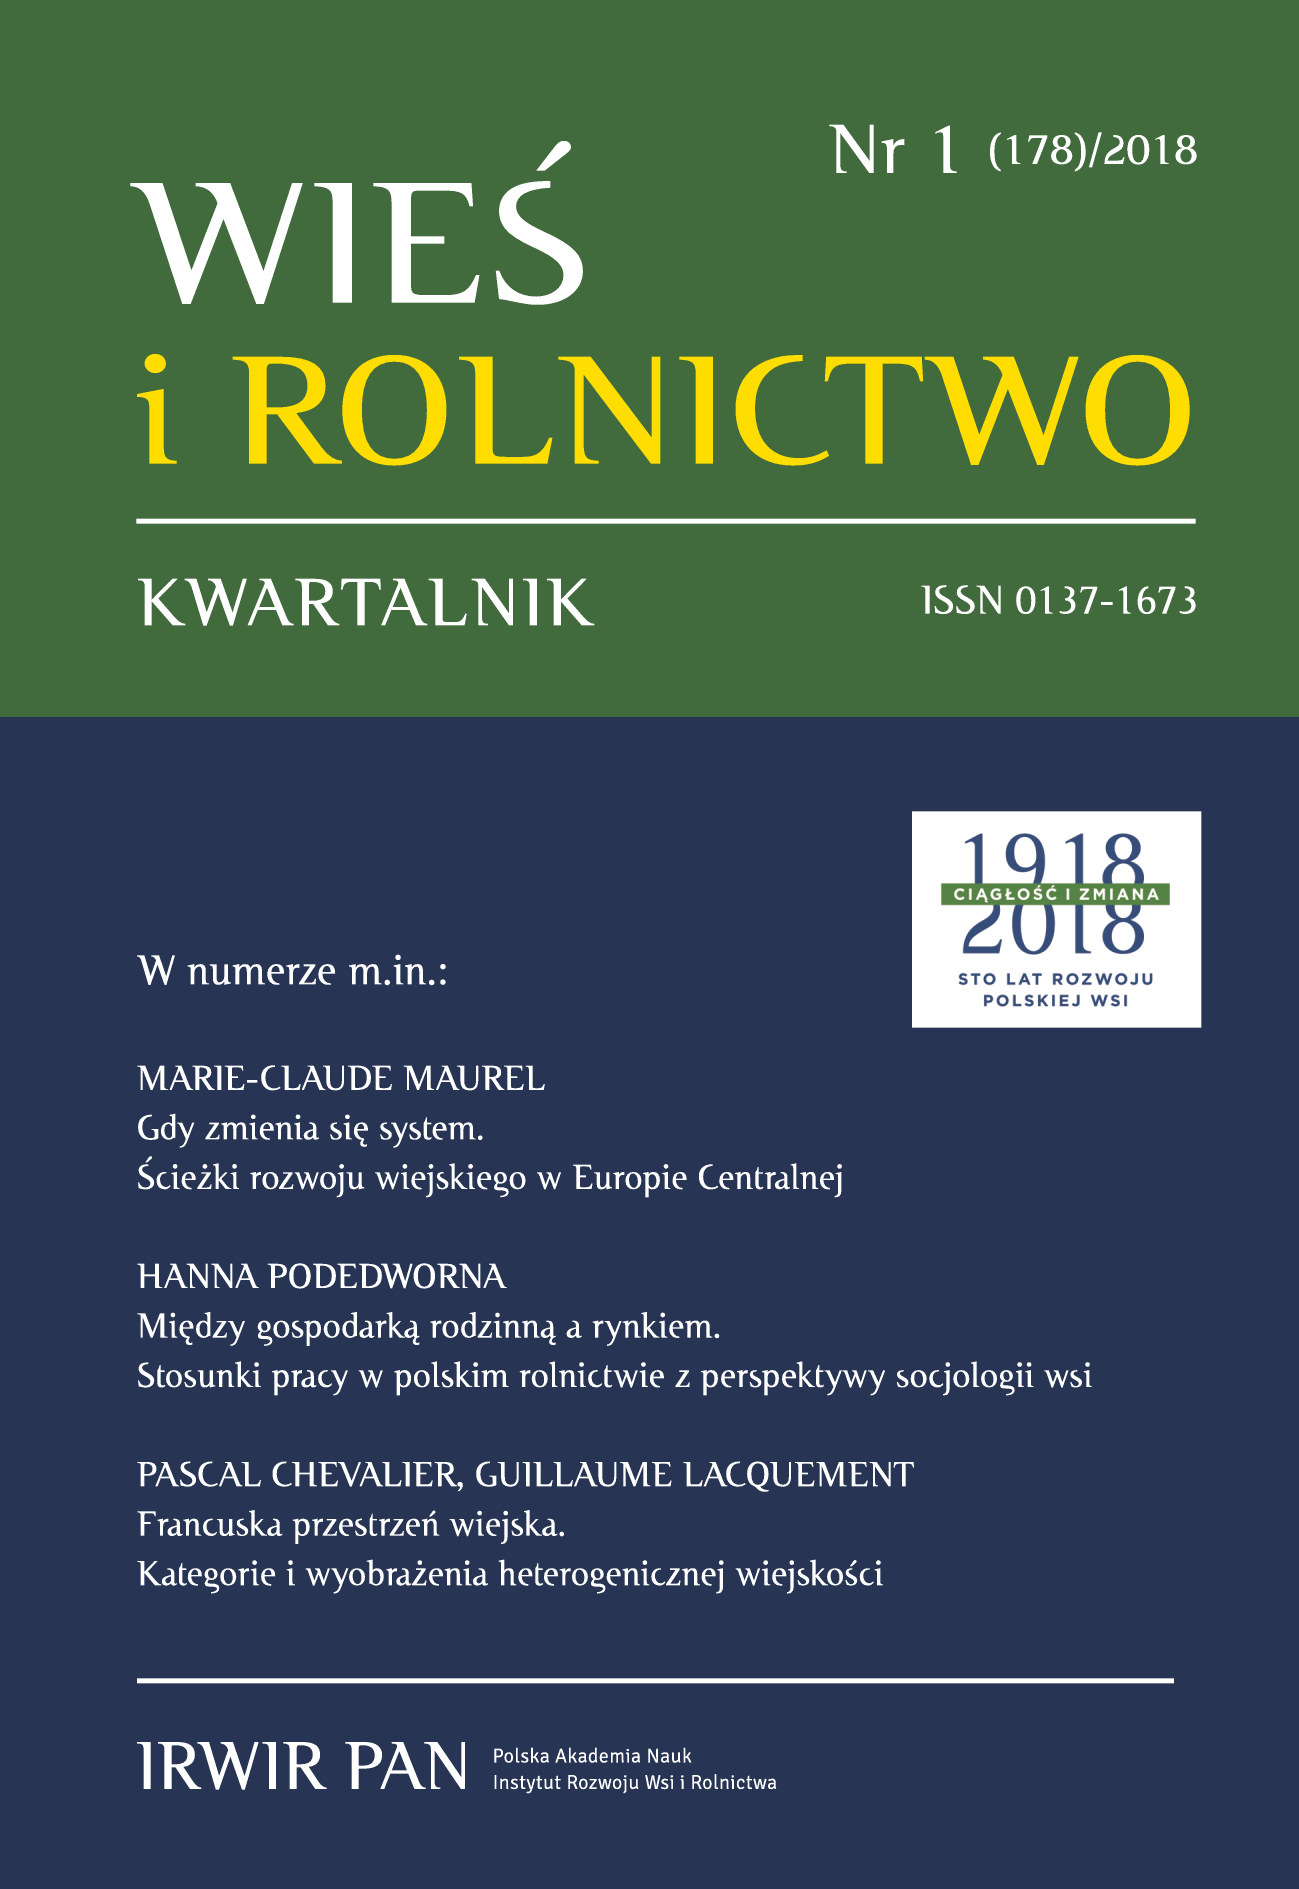 Maria Halamska - academic with the class Cover Image